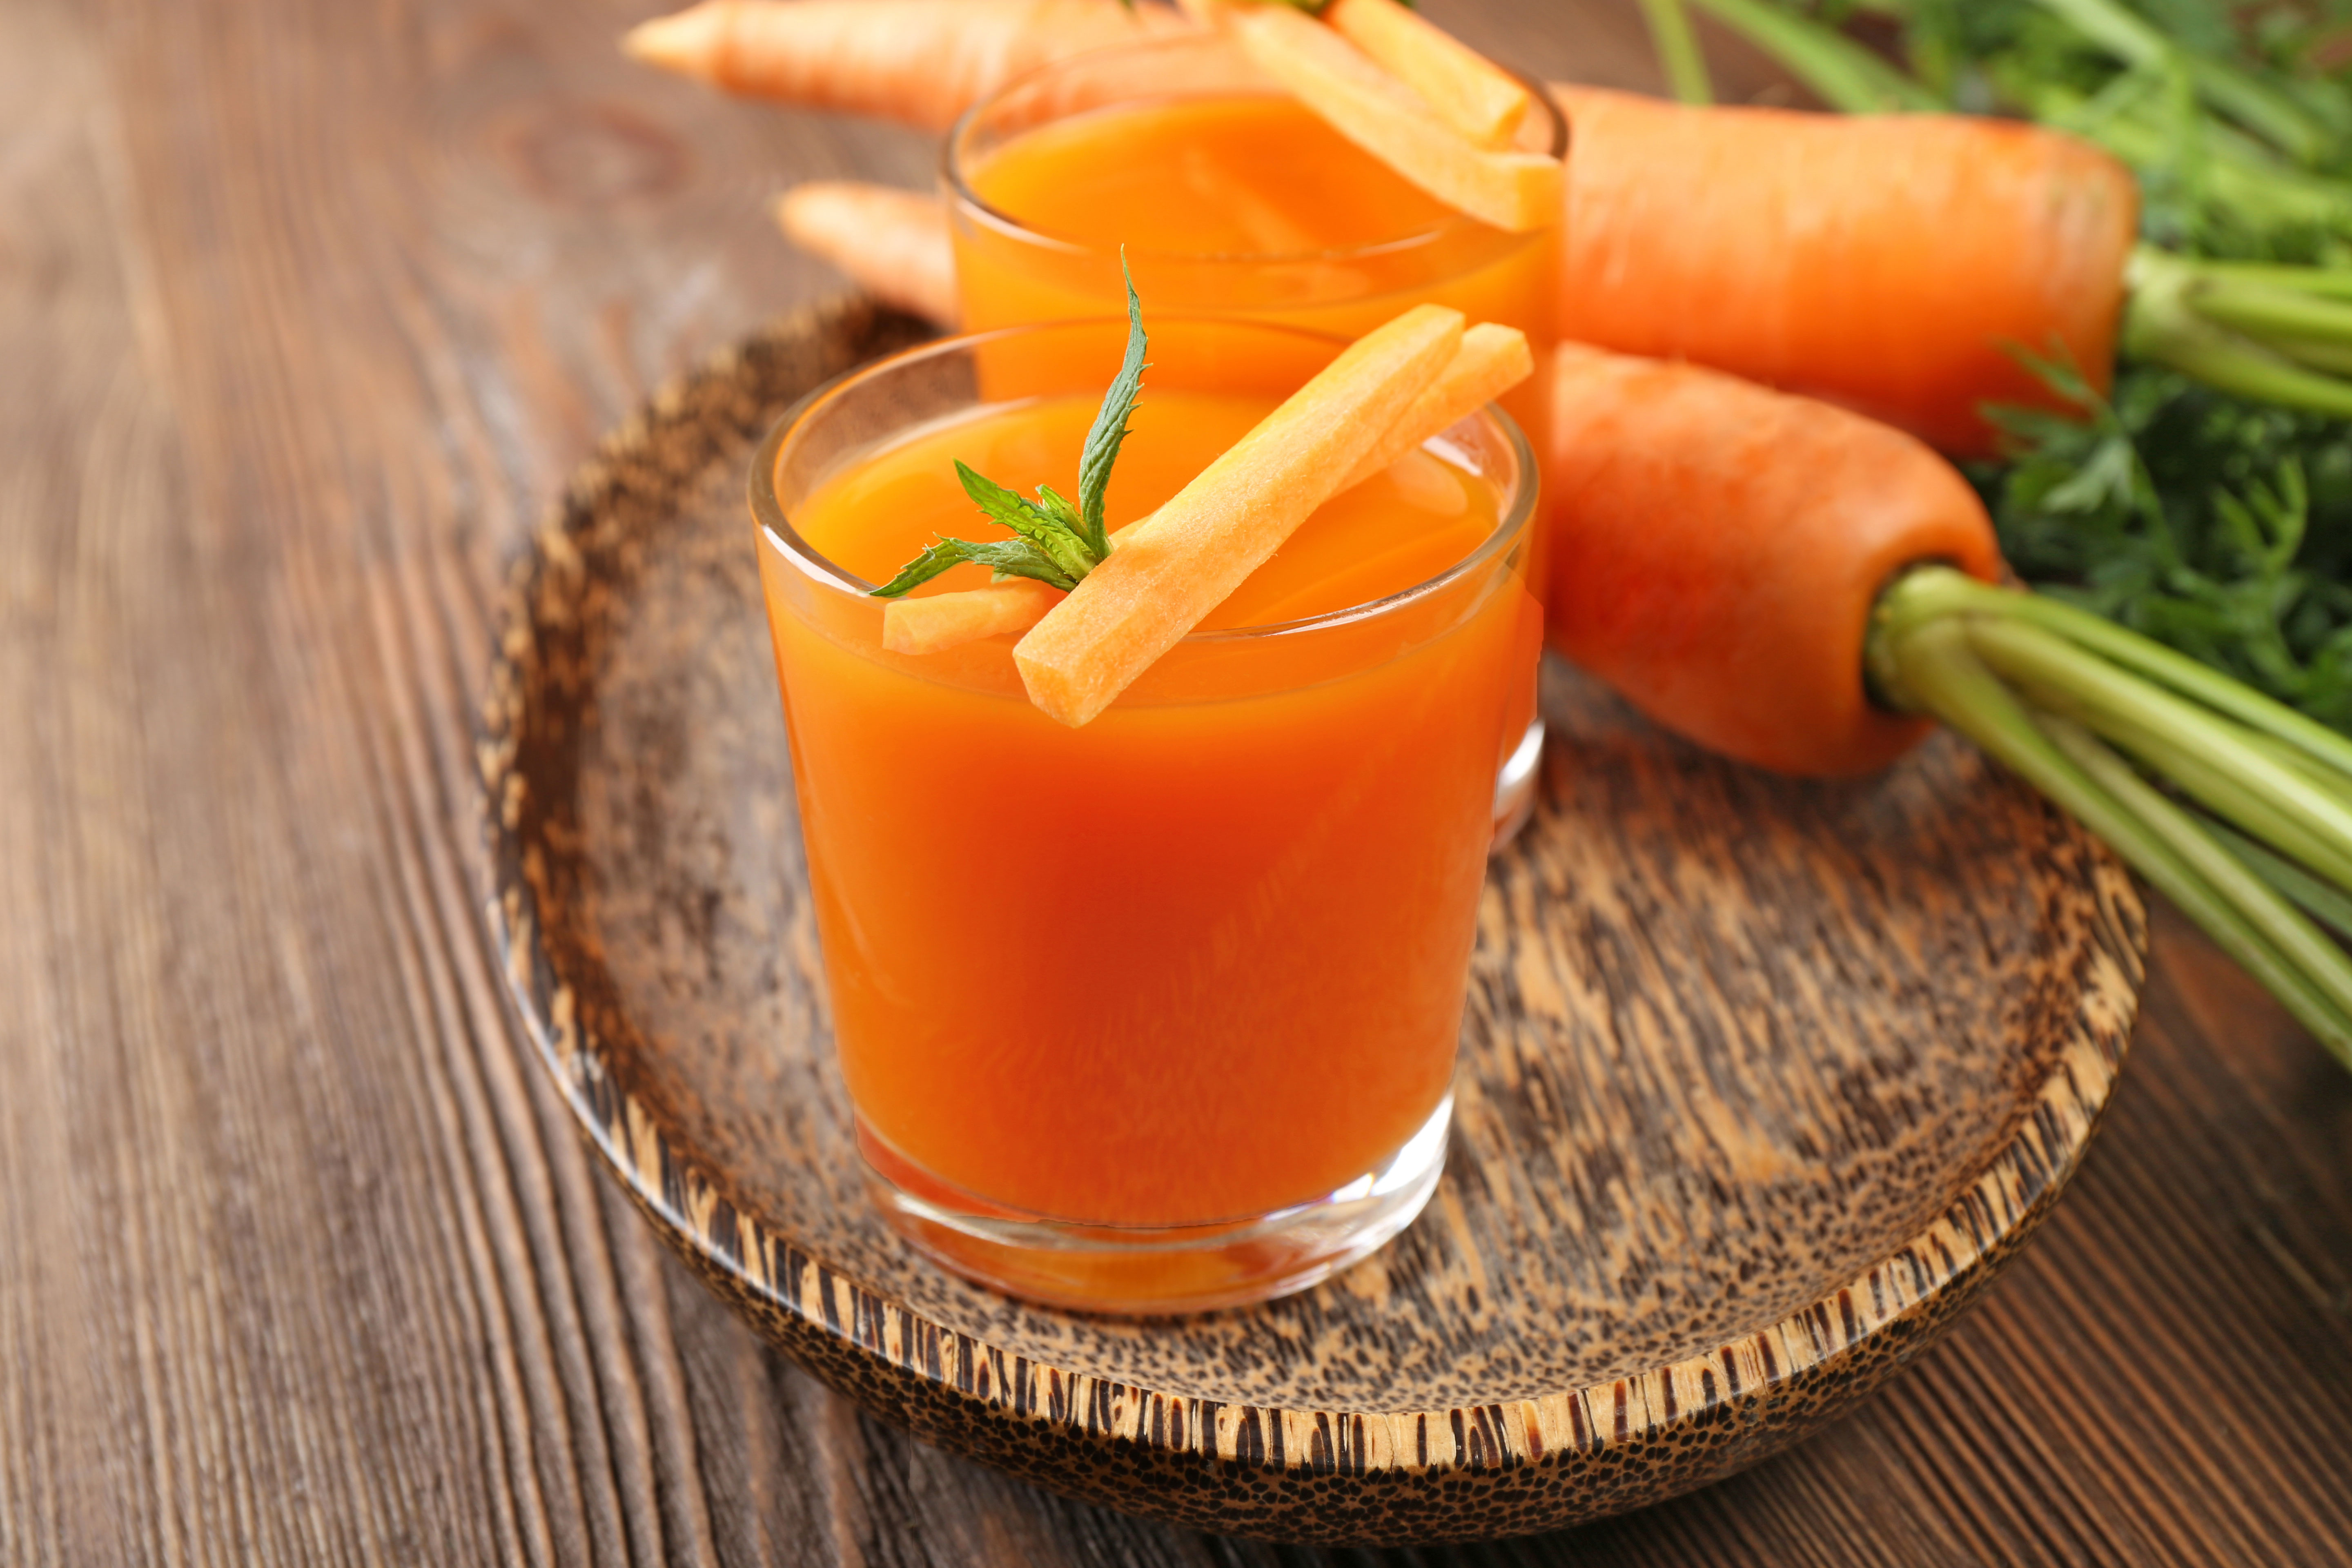 What Happens When You Drink Carrot Juice Daily